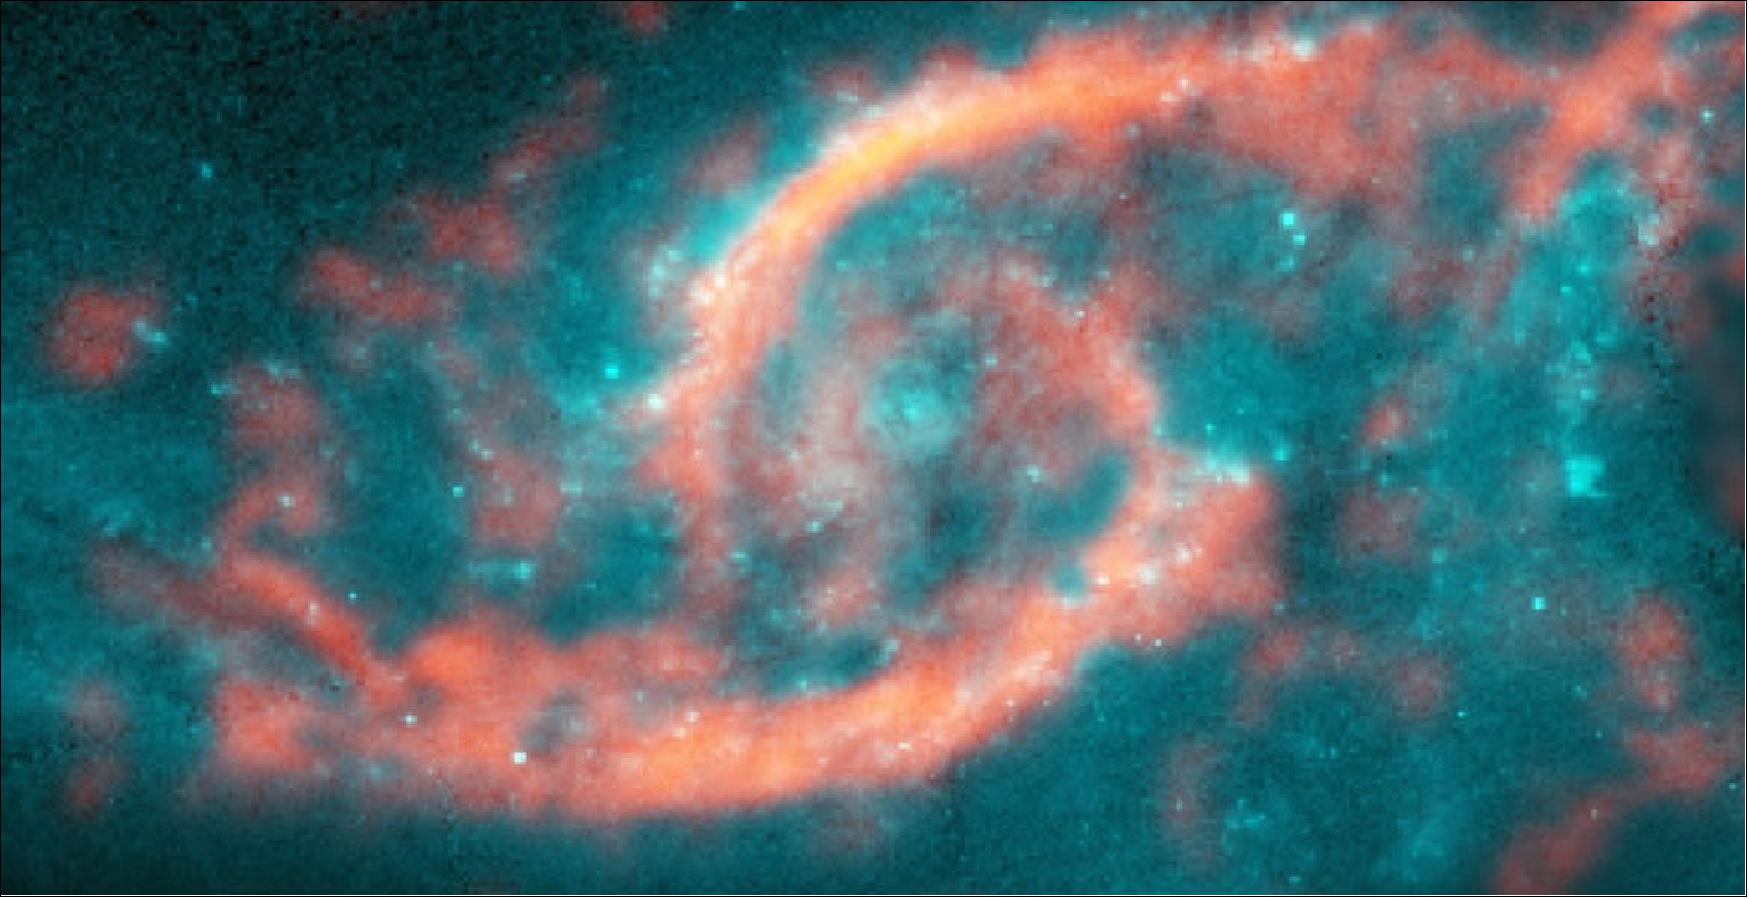 Figure 67: Dazzling eyelid-like features bursting with stars in galaxy IC 2163 formed from a tsunami of stars and gas triggered by a glancing collision with galaxy NGC 2207 (a portion of its spiral arm is shown on right side of image). ALMA image of carbon monoxide (orange), which revealed motion of the gas in these features, is shown on top of Hubble image (blue) of the galaxy (image credit: M. Kaufman; B. Saxton (NRAO/AUI/NSF); ALMA (ESO/NAOJ/NRAO); NASA/ESA Hubble Space Telescope)